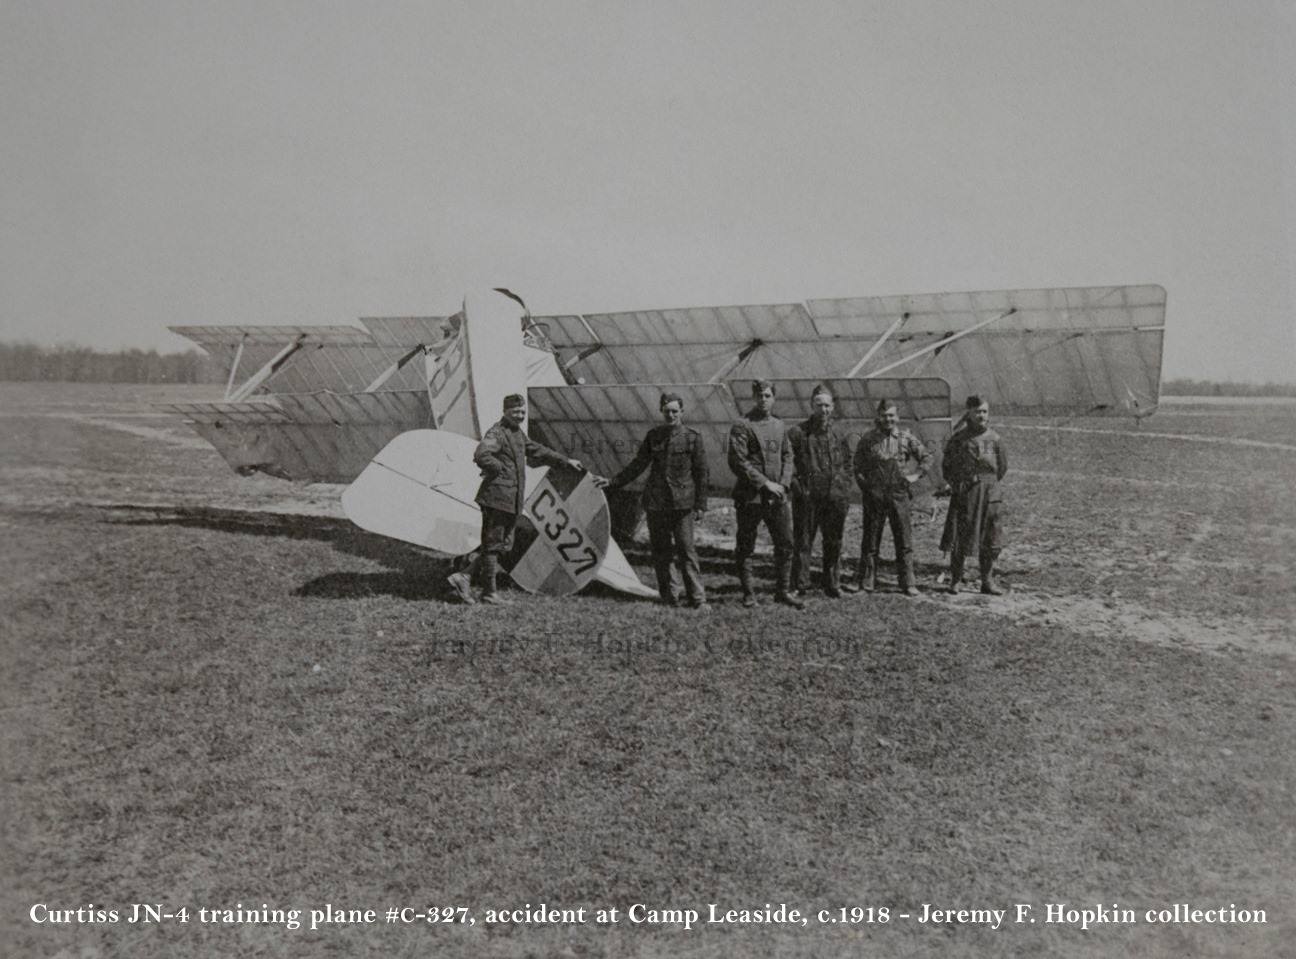 R.A.F. (Canada) training plane C327, its tail broken during an accident at Camp Leaside, 1918. The camp was located at Laird Drive & Wicksteed Ave., within today’s Leaside neighborhood in Toronto.